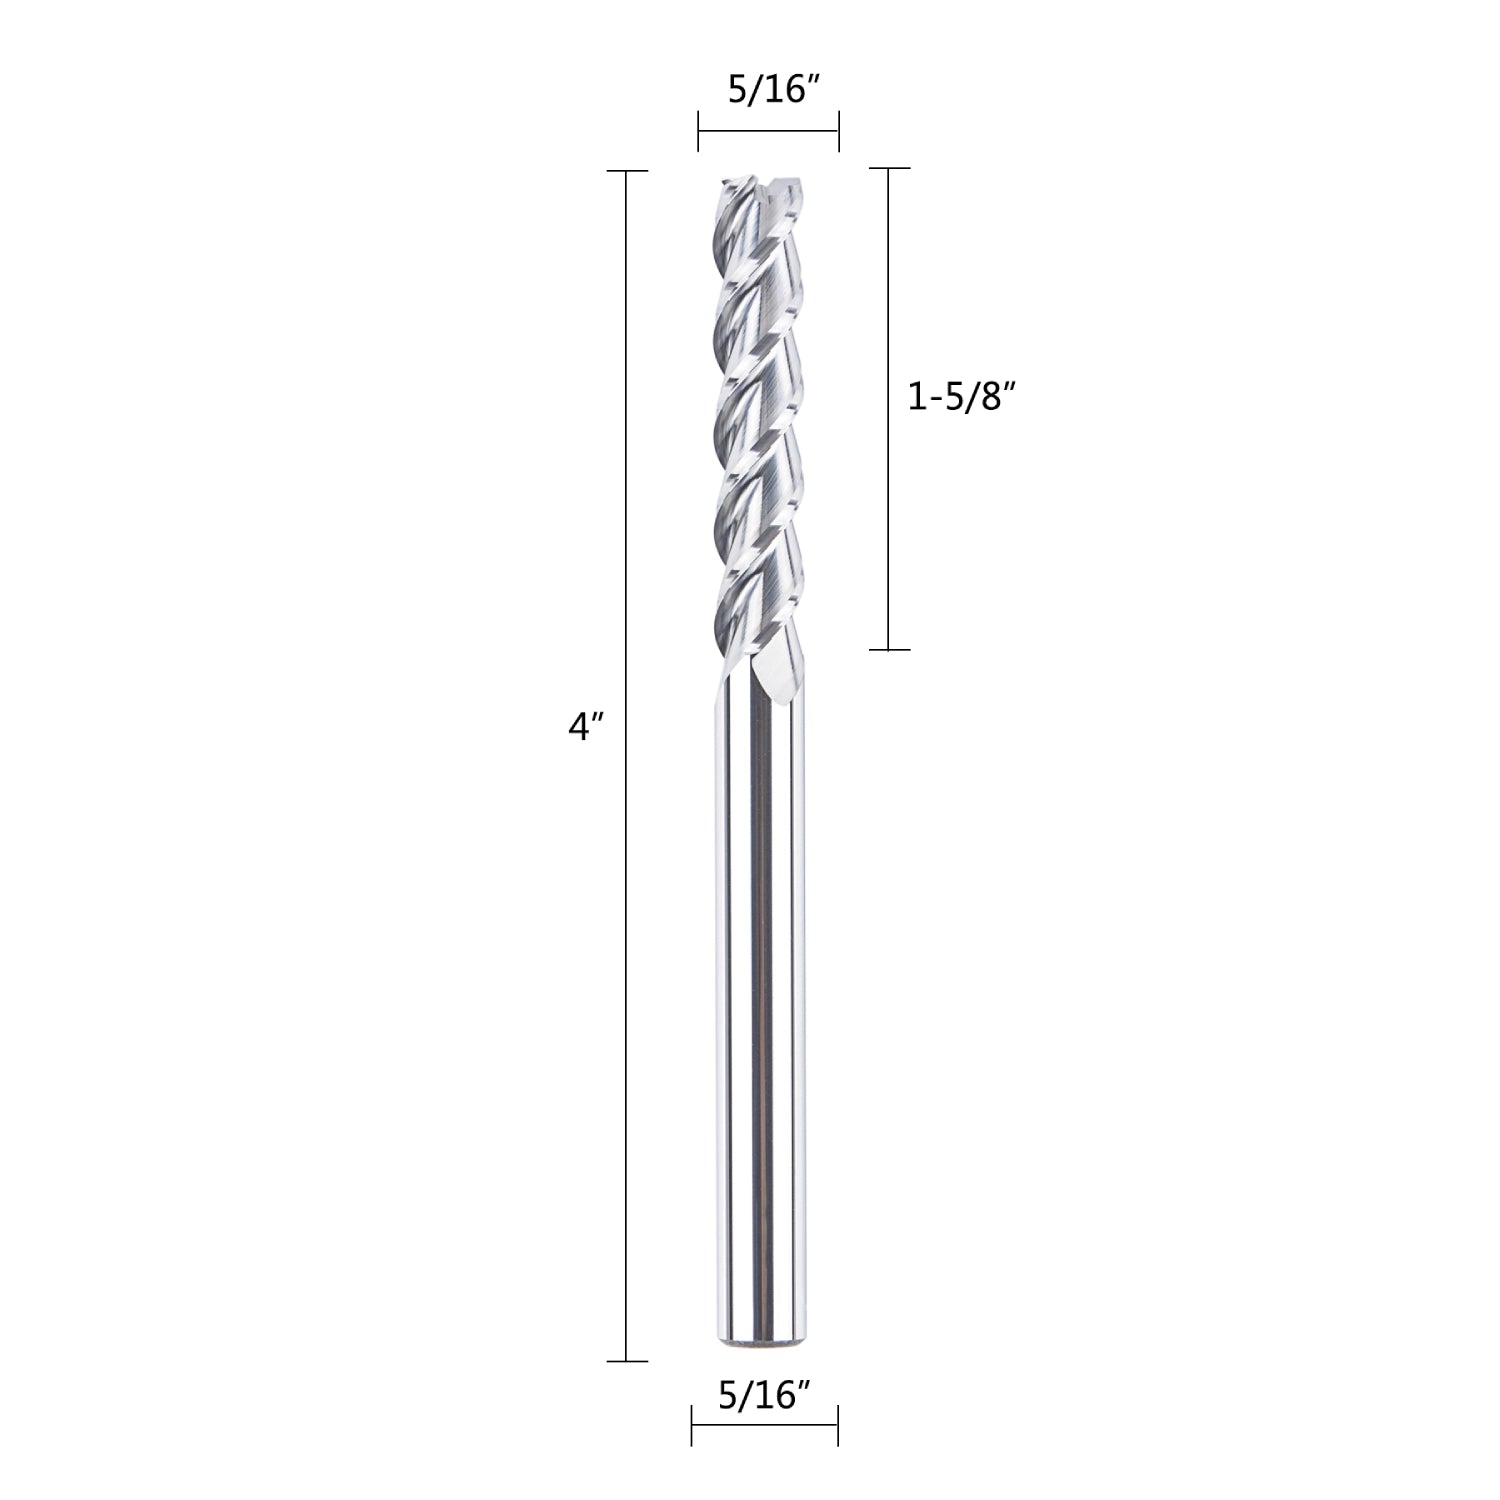 SpeTool 3 Flute 5/16" Dia End Mill For Aluminum 4" Extra Long Router Bit